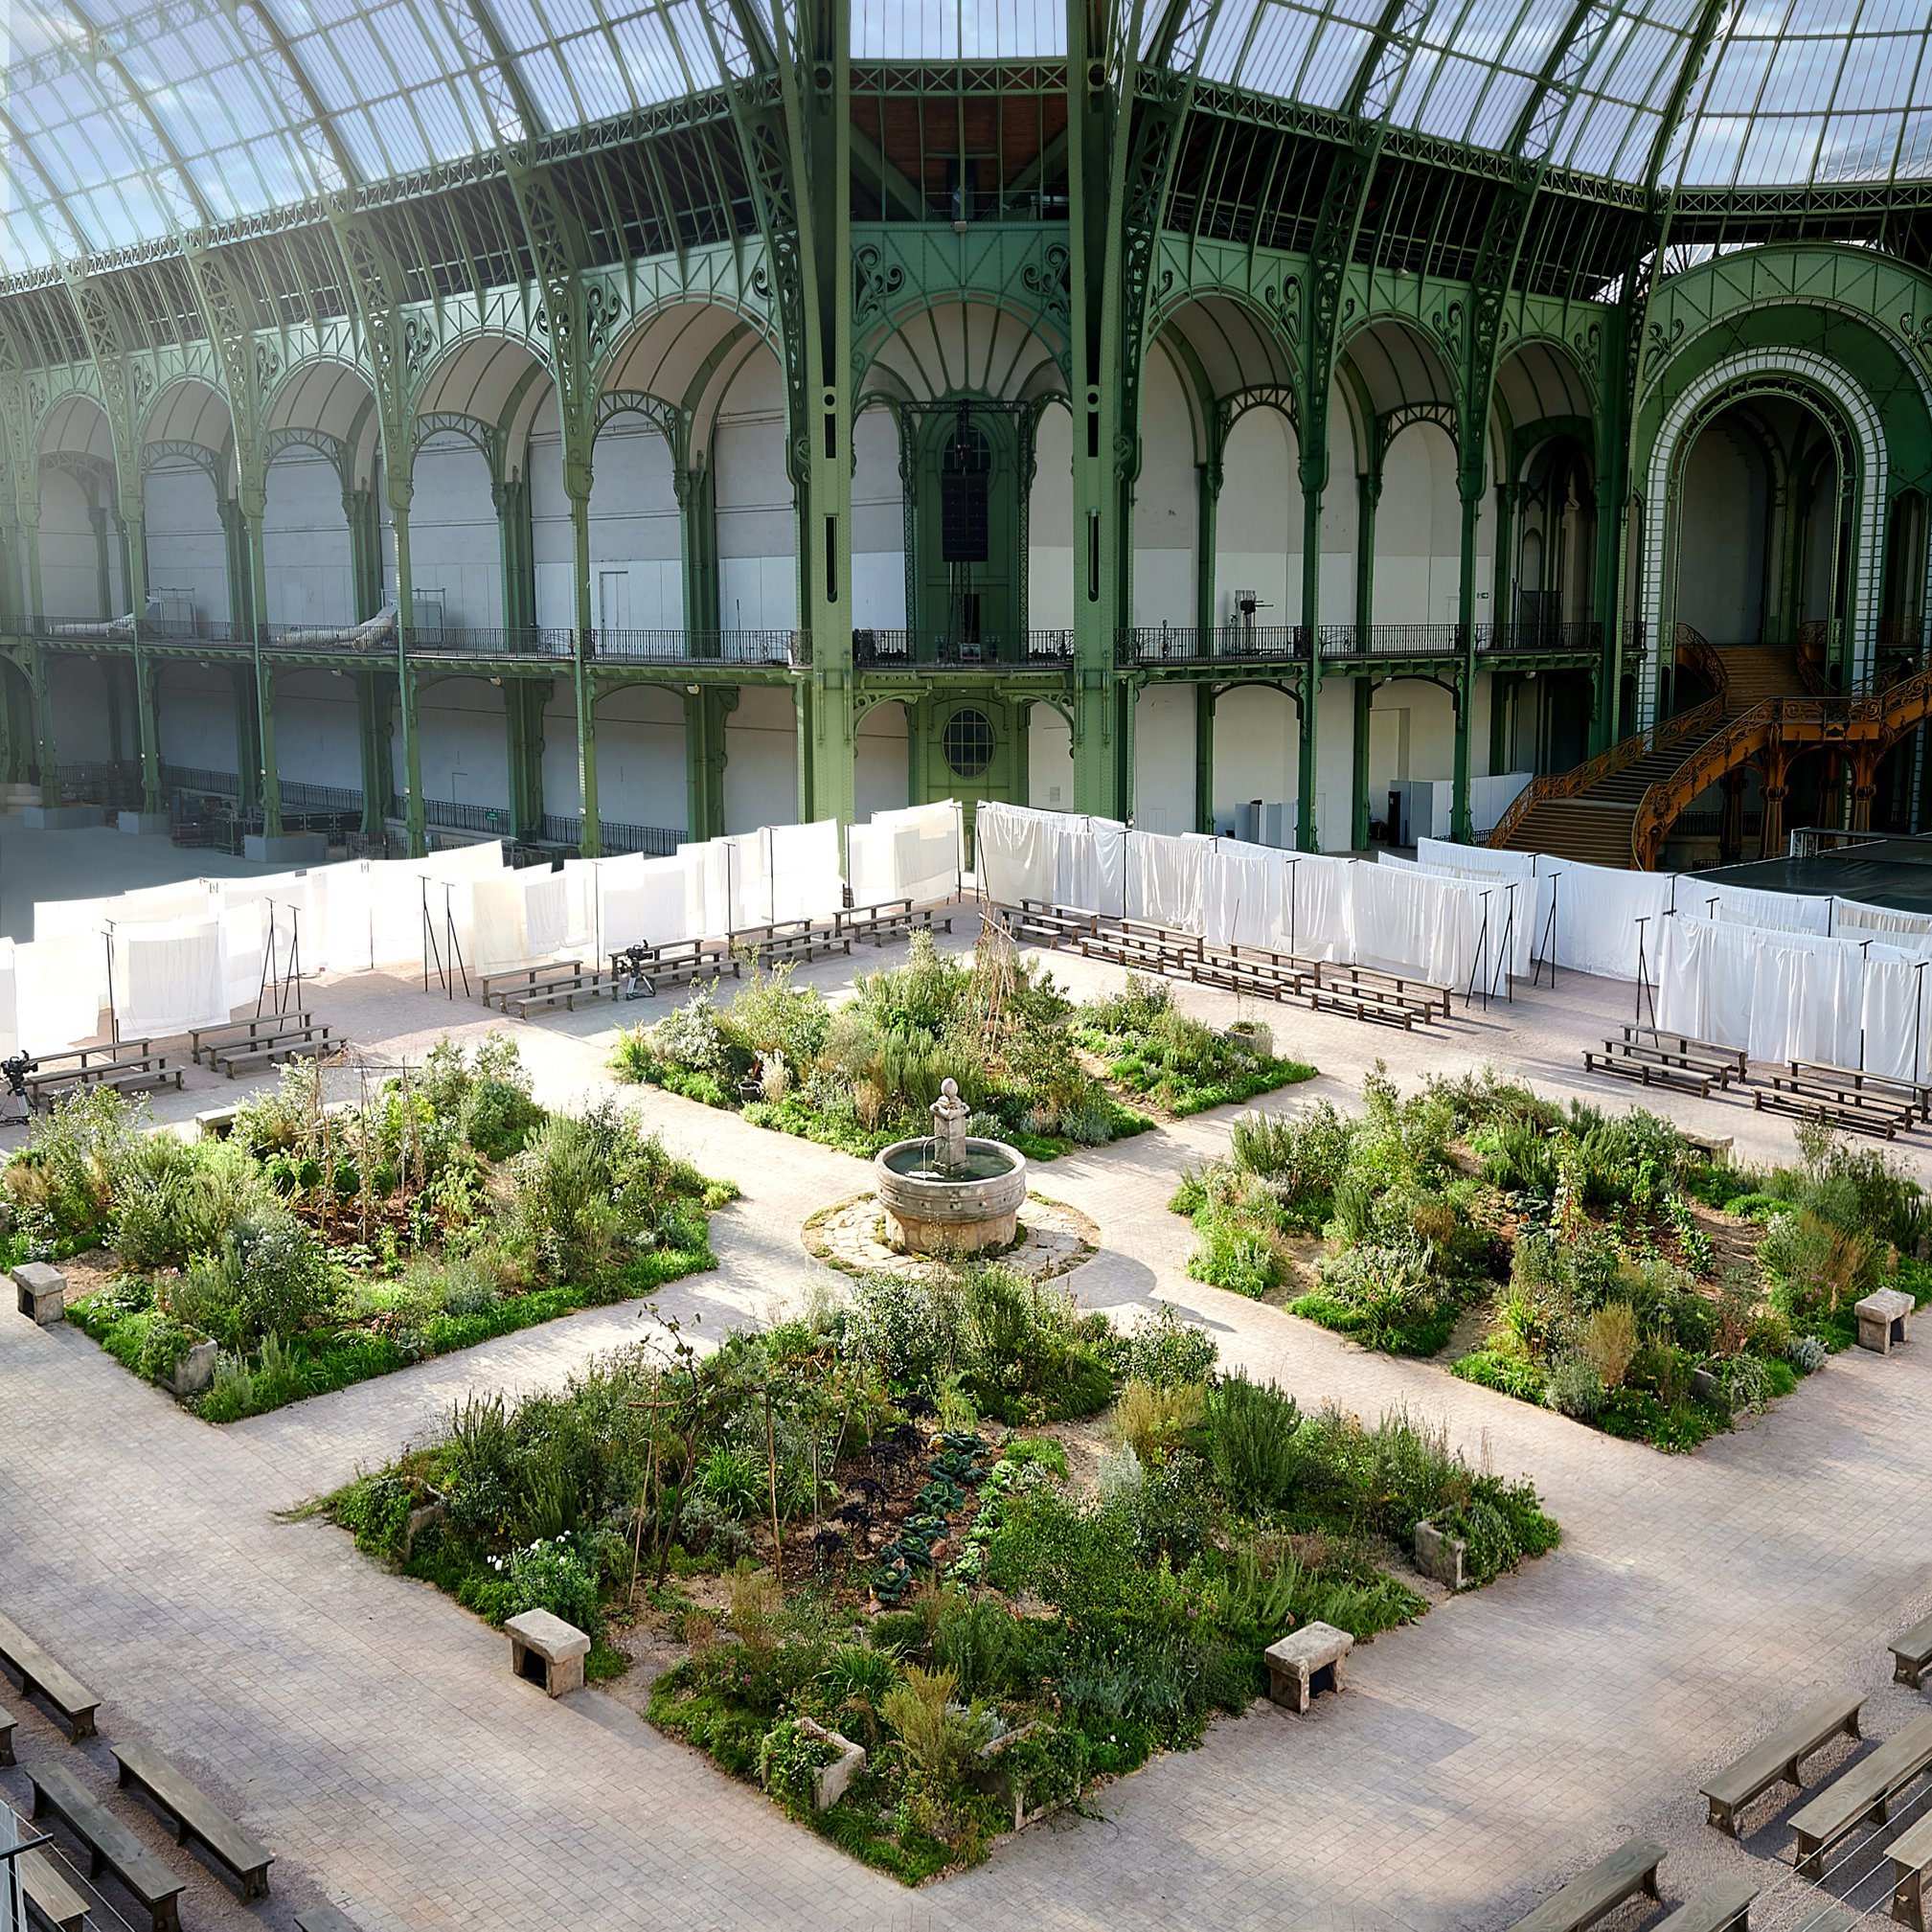 The nave of the Grand Palais has metamorphosed into a cloister garden for Virginie Viard’s CHANEL Spring-Summer 2020 Haute Couture show in Paris. The setting evokes one of the key places in Gabrielle Chanel’s childhood — the ancient Cistercian Abbey of Aubazine.